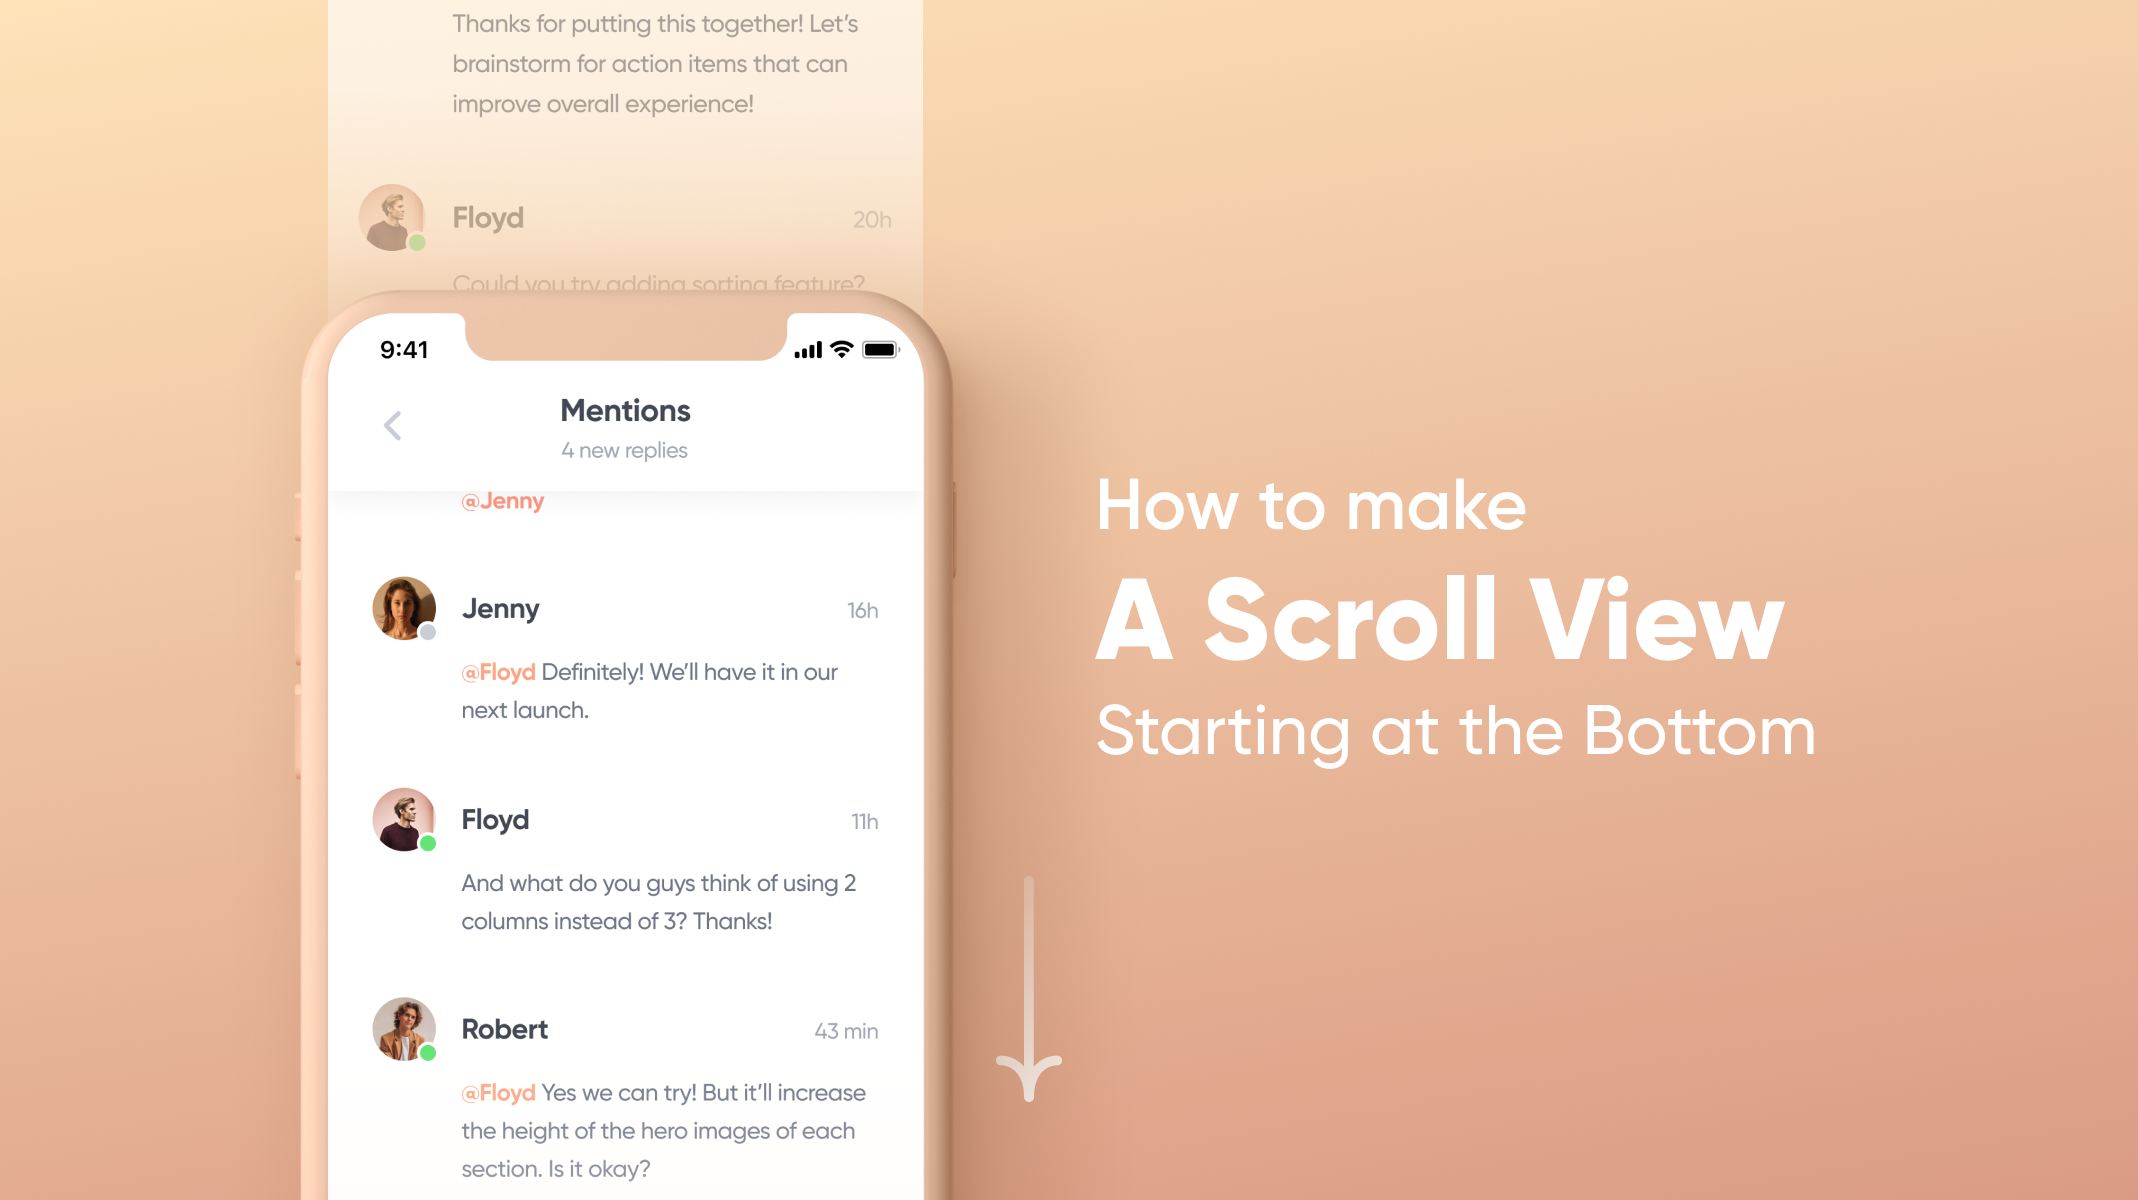 Prototype a Scroll View (Starting at the Bottom) for a Messaging App Thumbnail